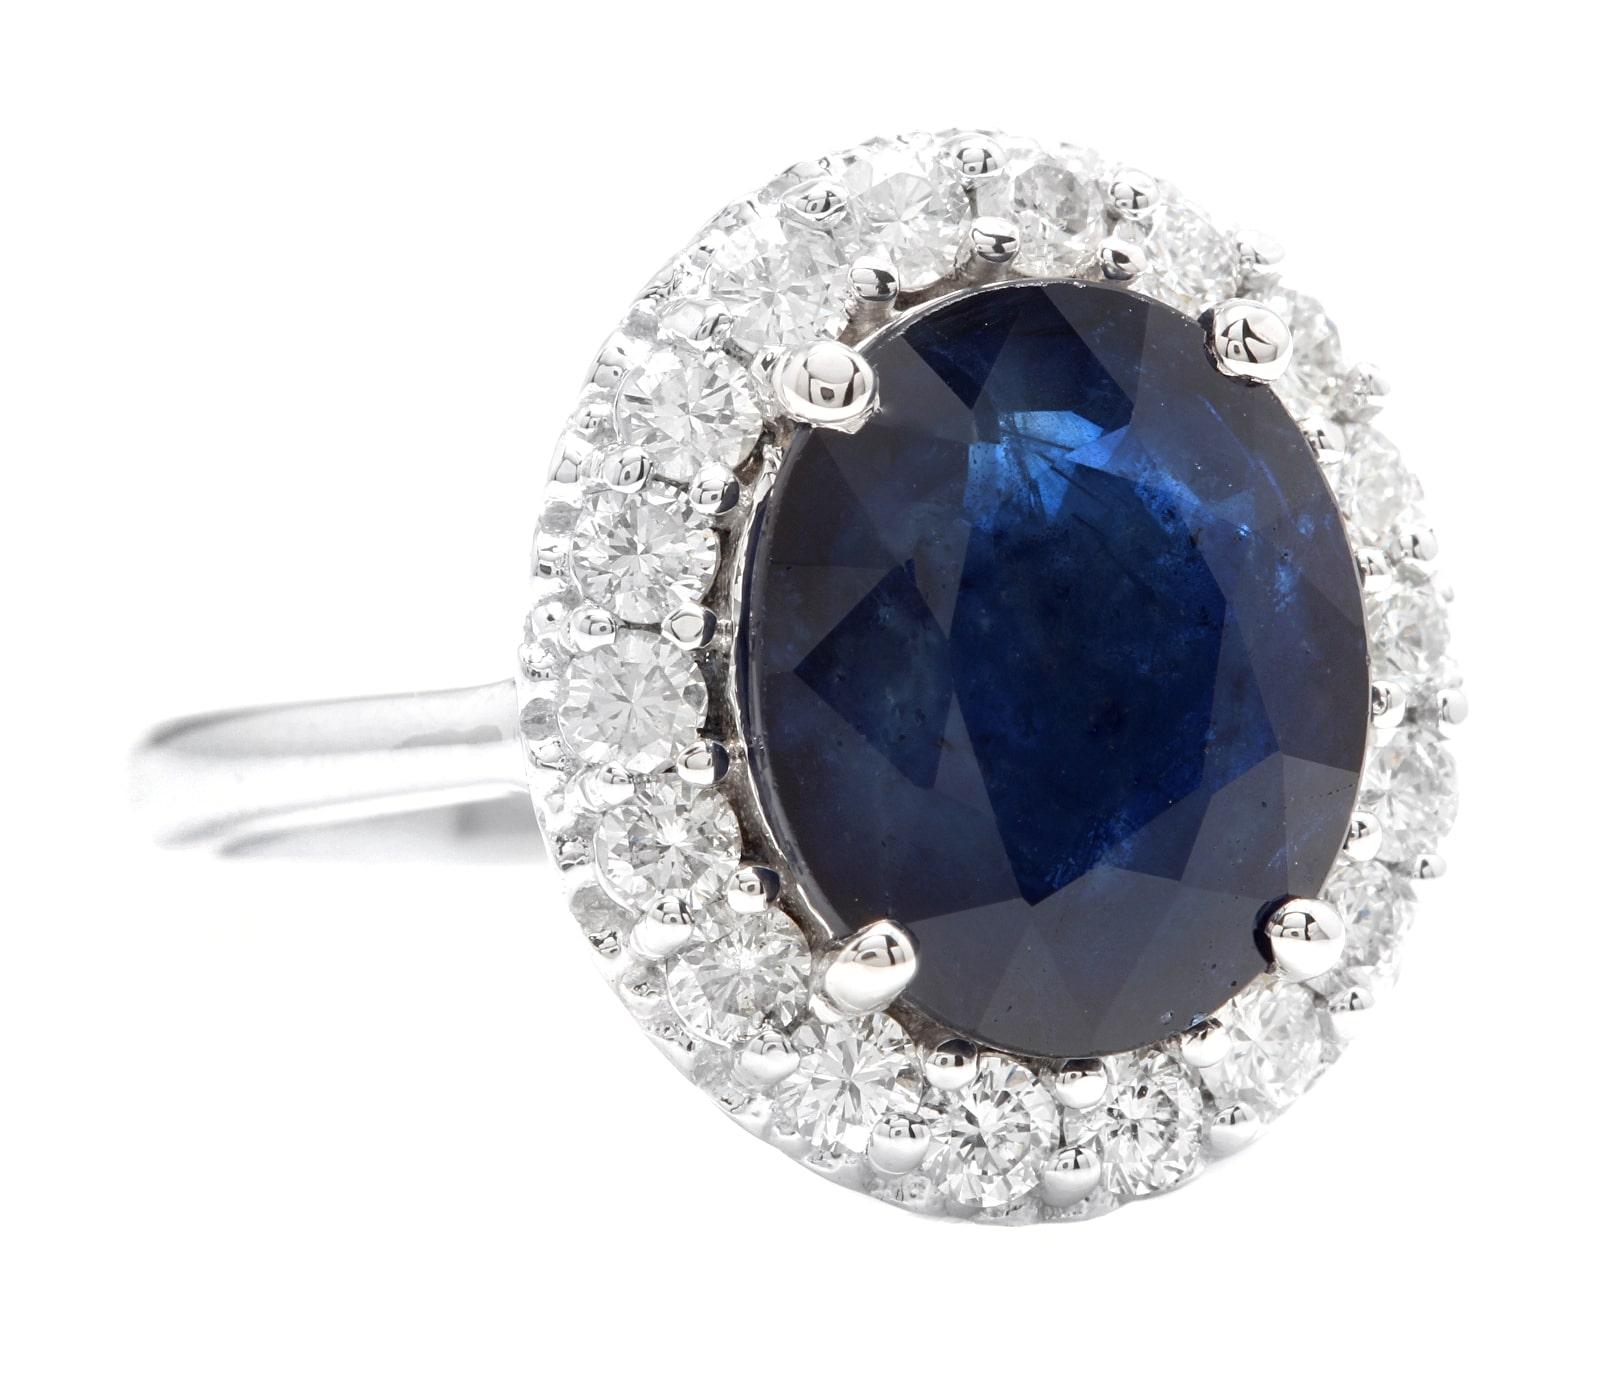 6.40 Carats Natural Sapphire and Diamond 14K Solid White Gold Ring

Suggested Replacement Value: Approx. $6,500.00

Total Natural Oval Cut Sapphire Weights: Approx. 5.50 Carats 

Sapphire Measures: Approx. 12.00 x 10.00mm

Sapphire Treatment: